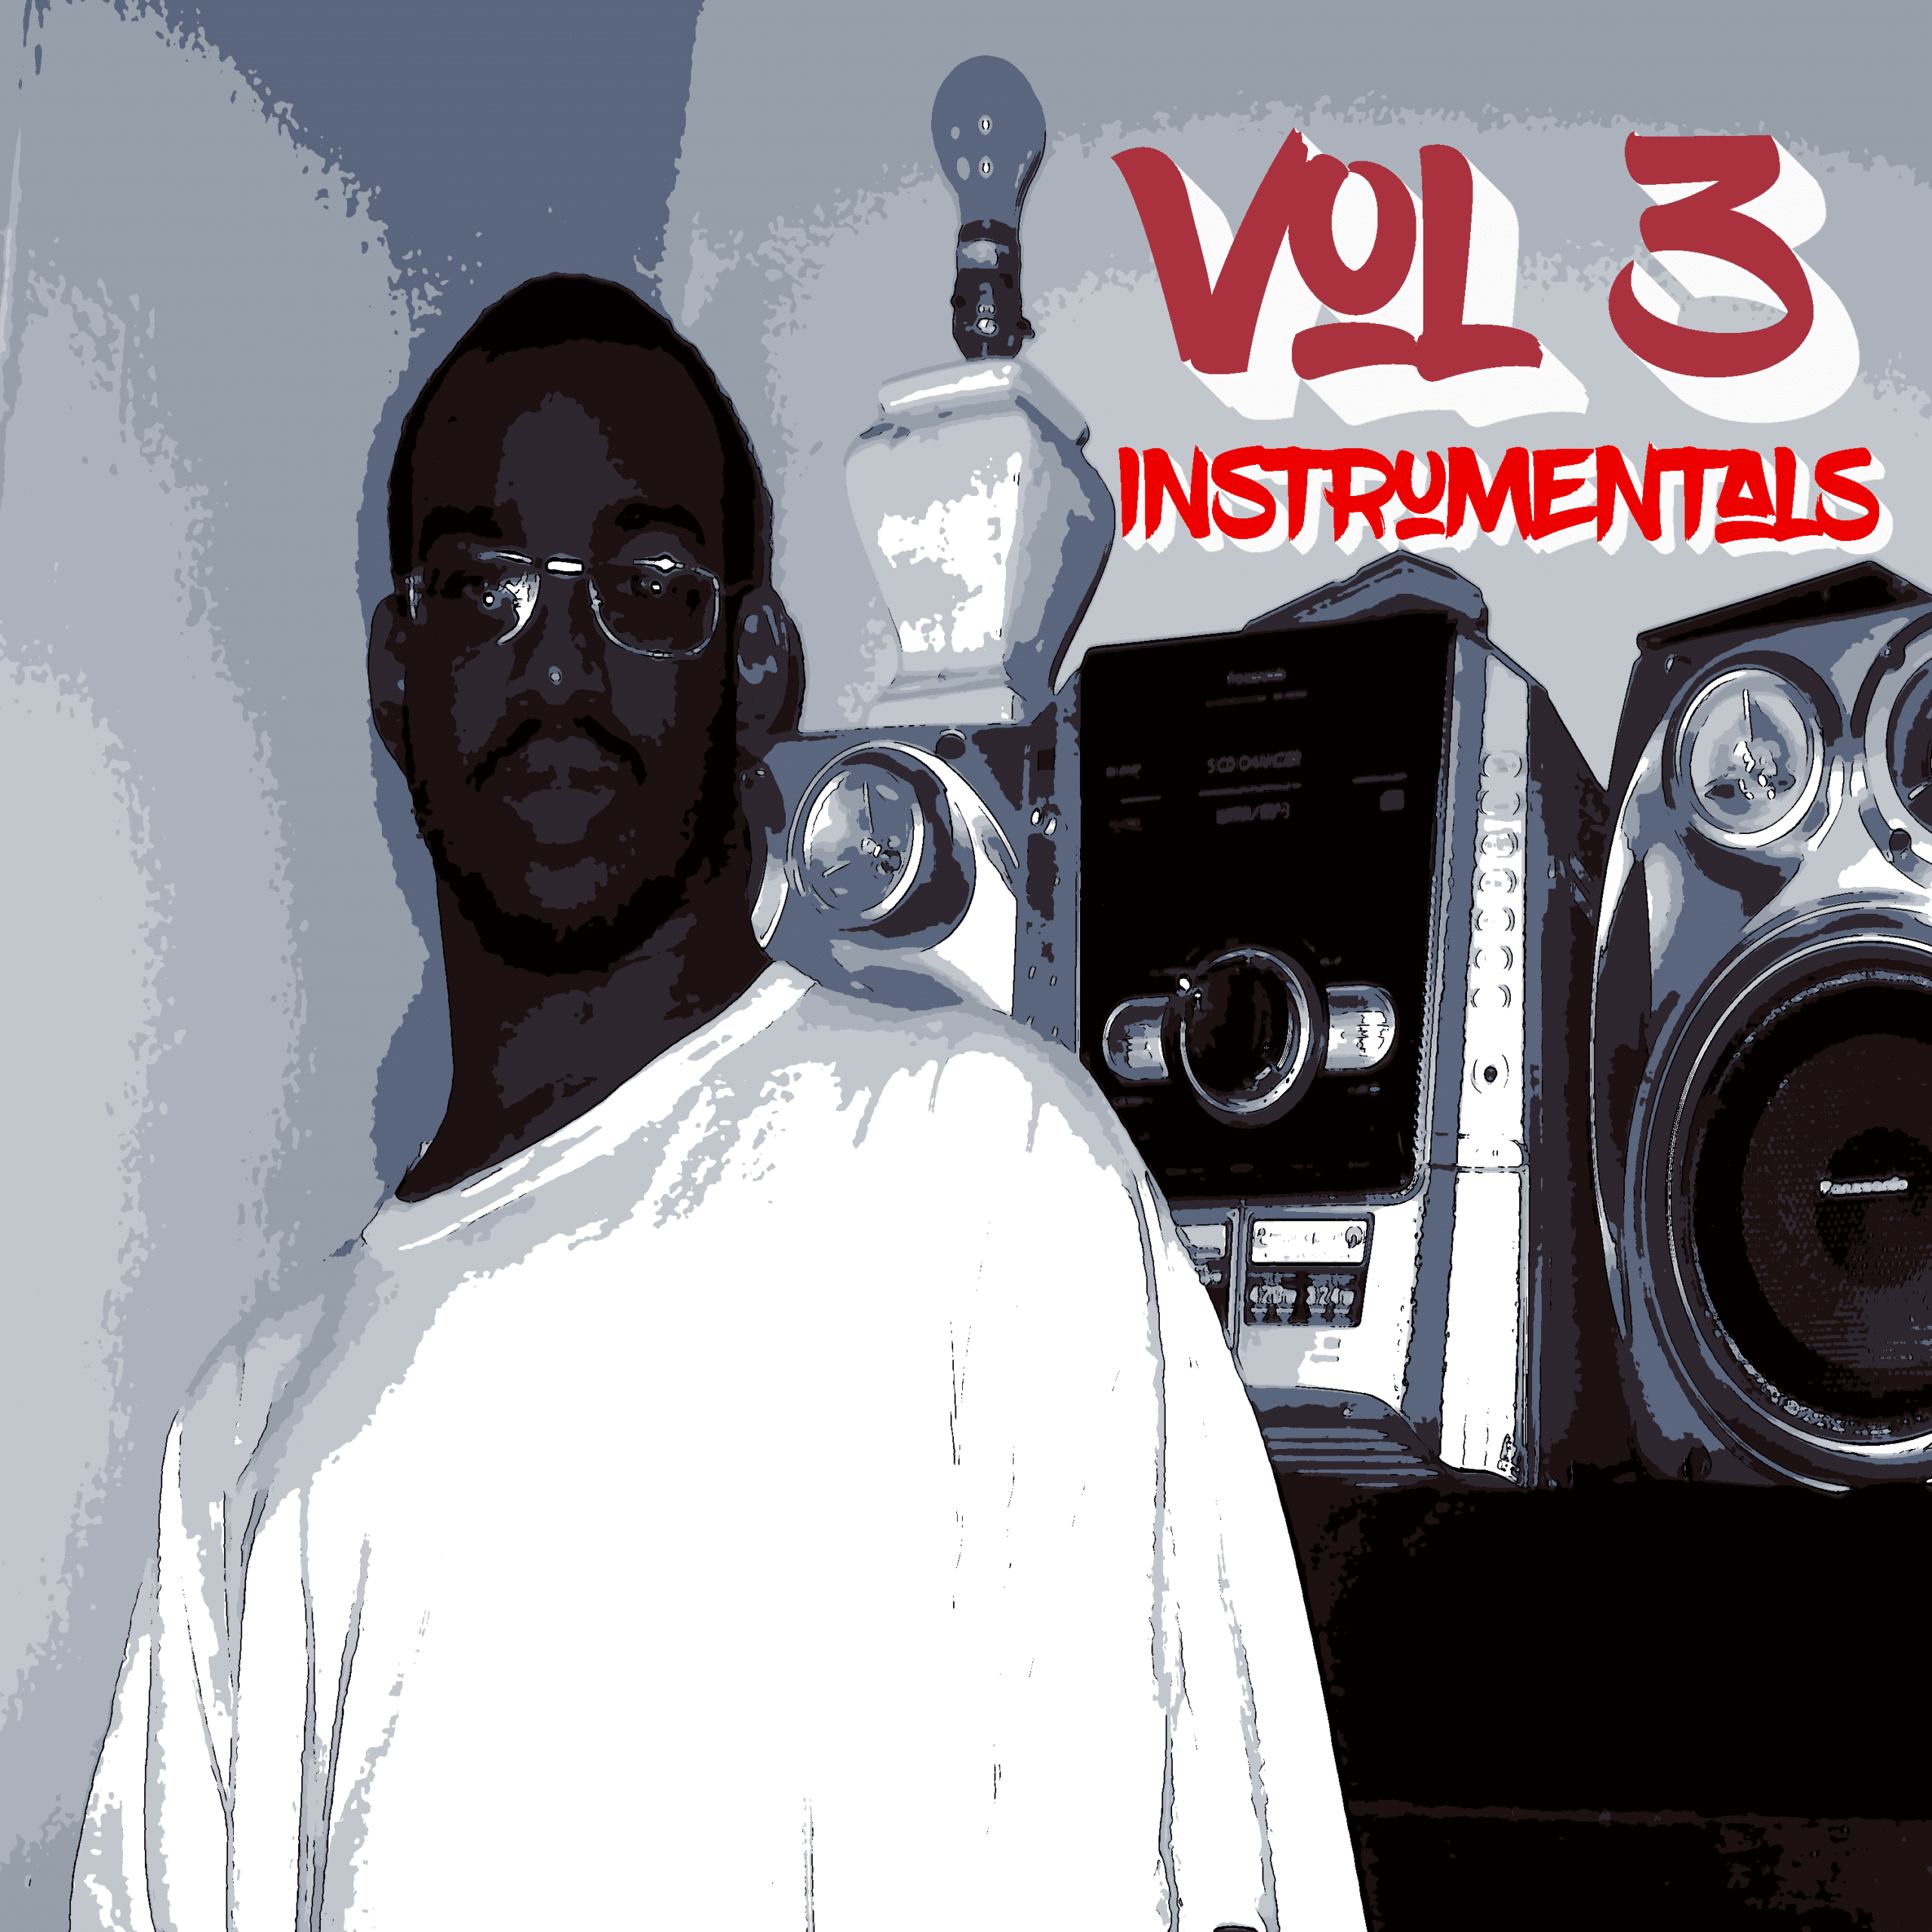 You are currently viewing CJF Radio, Vol 3 Instrumentals